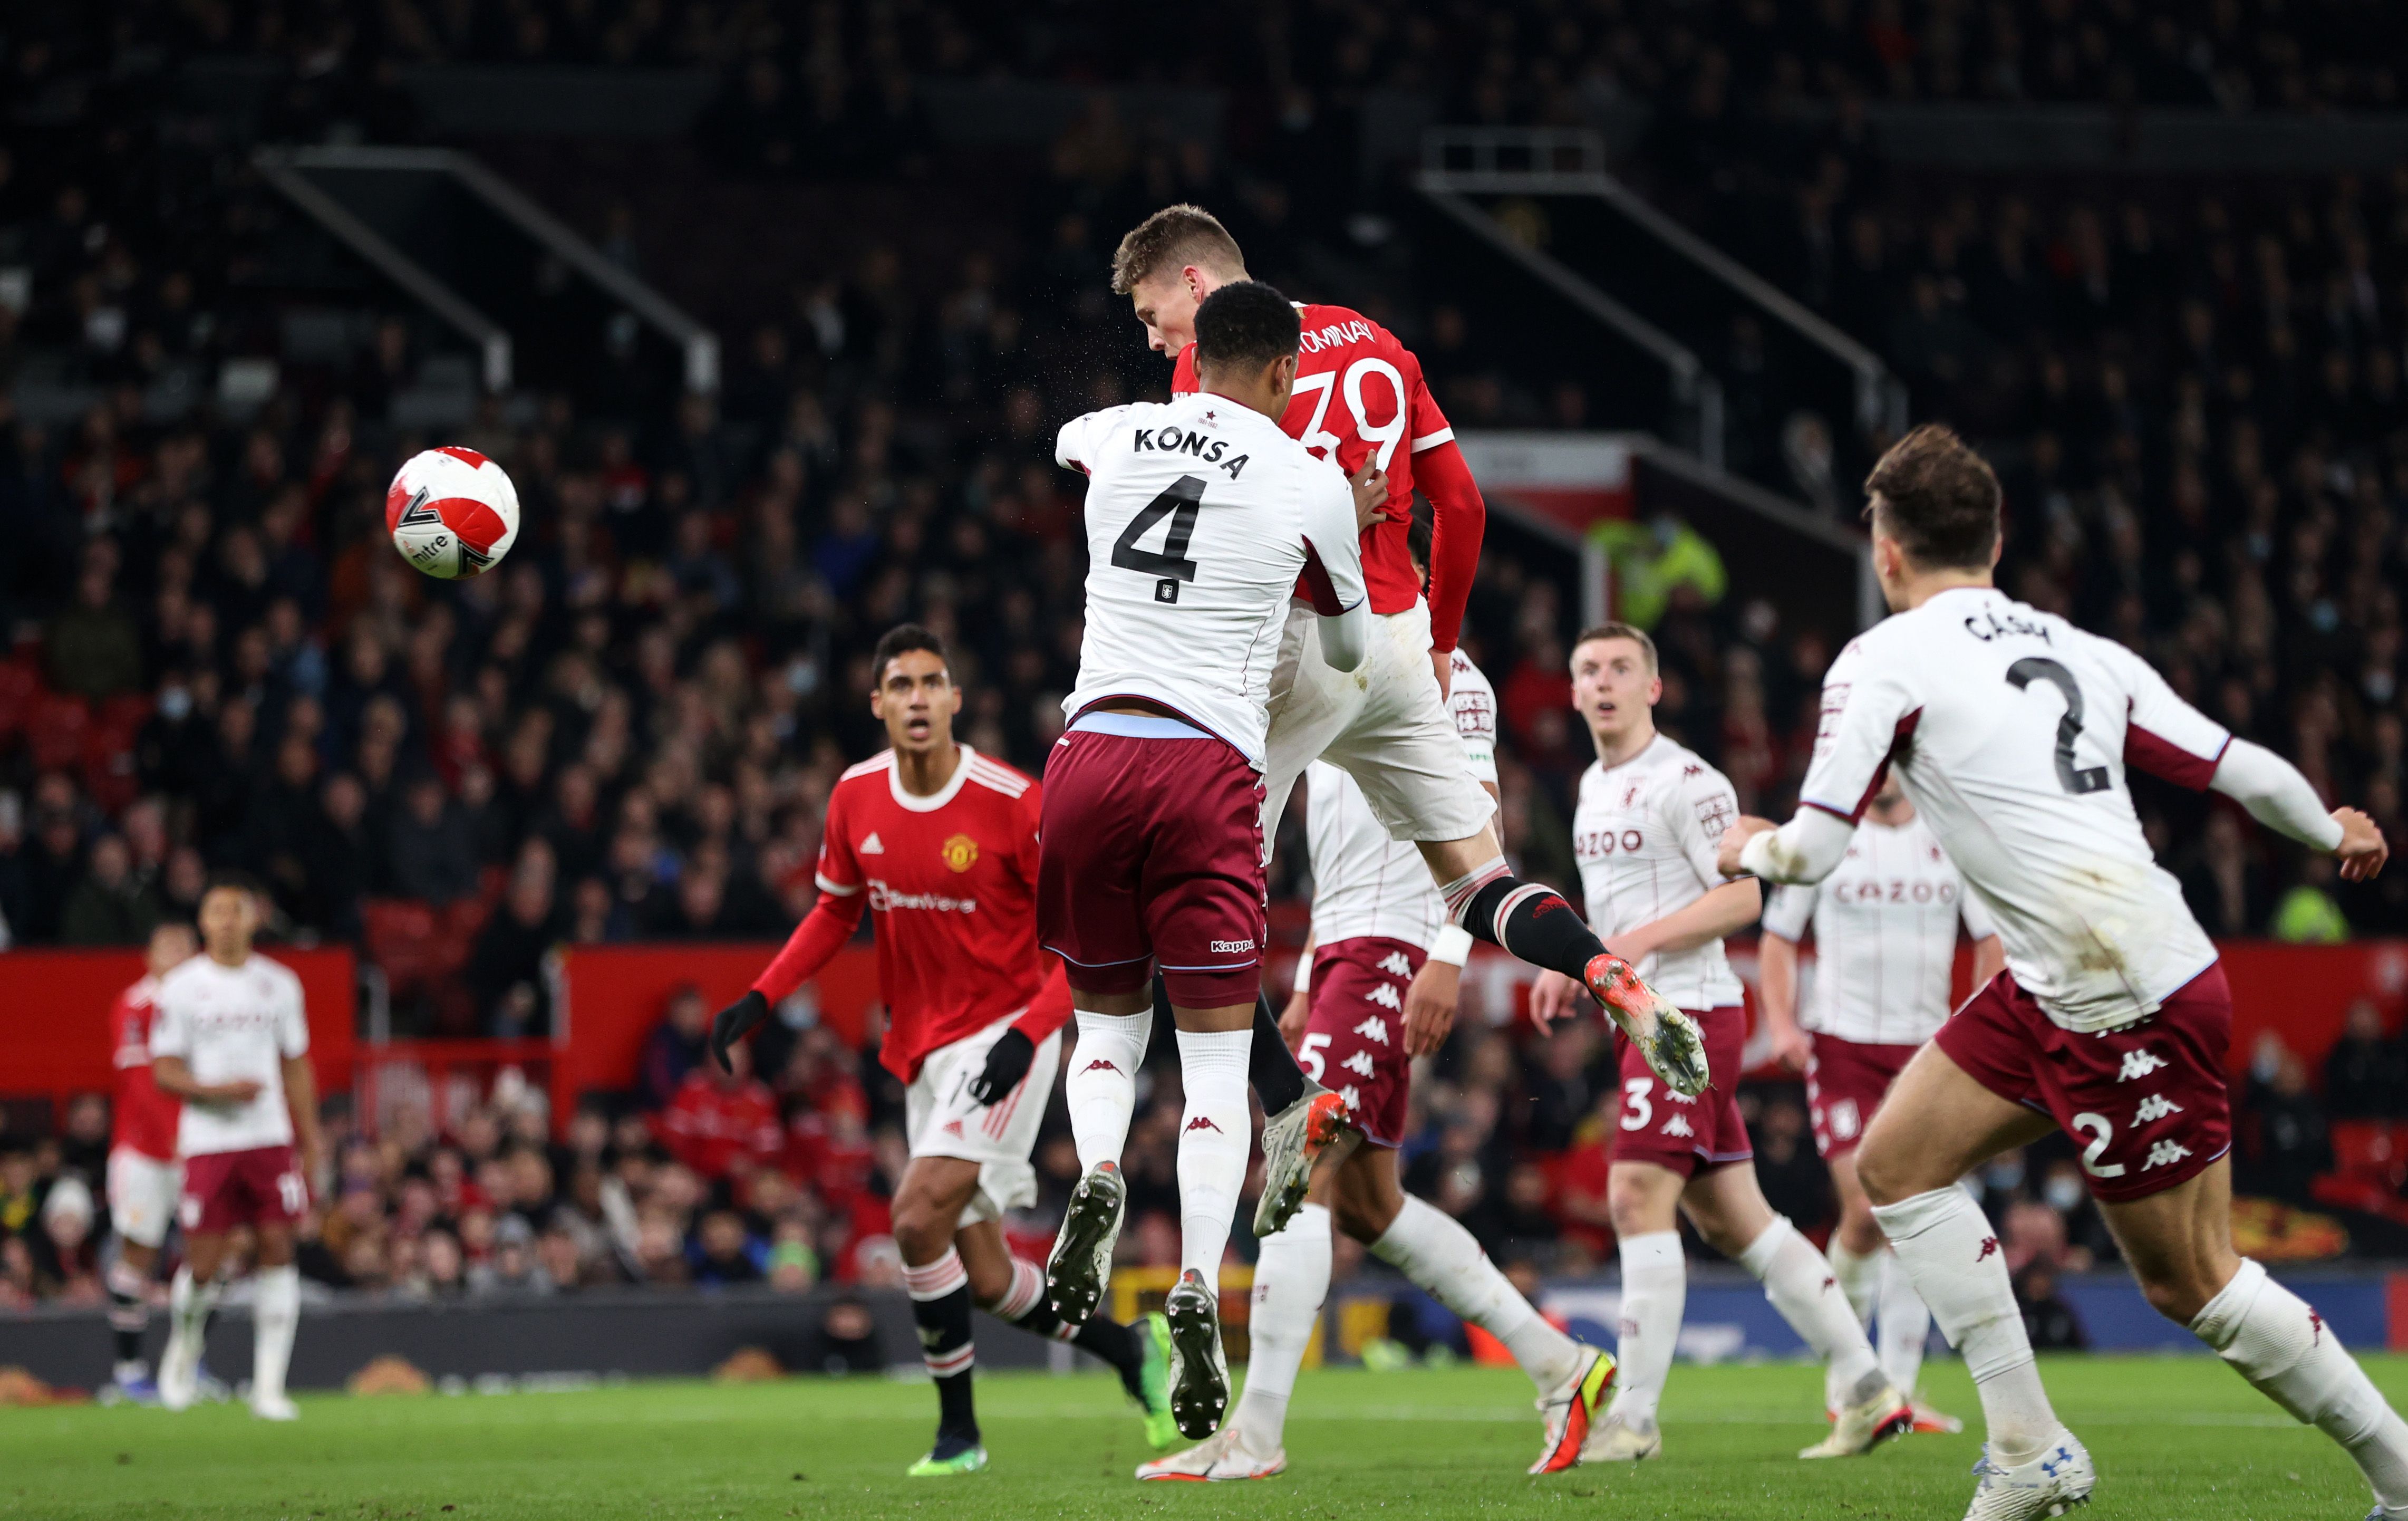 Scott McTominay of Manchester United scores the first goal during the Emirates FA Cup Third Round match between Manchester United and Aston Villa